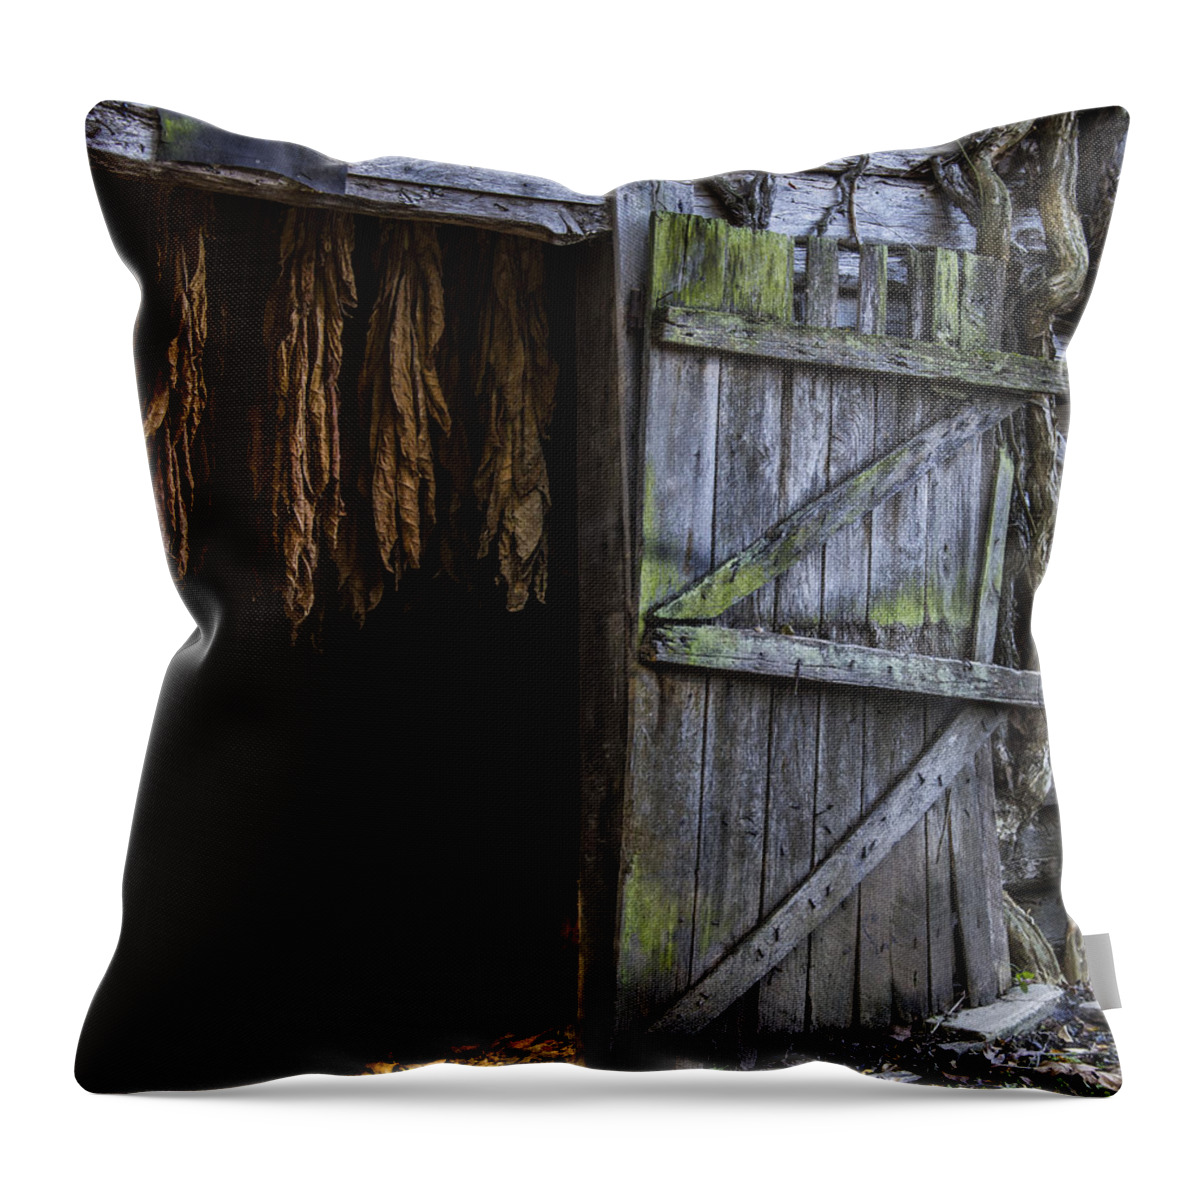 Landscape Throw Pillow featuring the photograph The Tobacco Cures by Amber Kresge